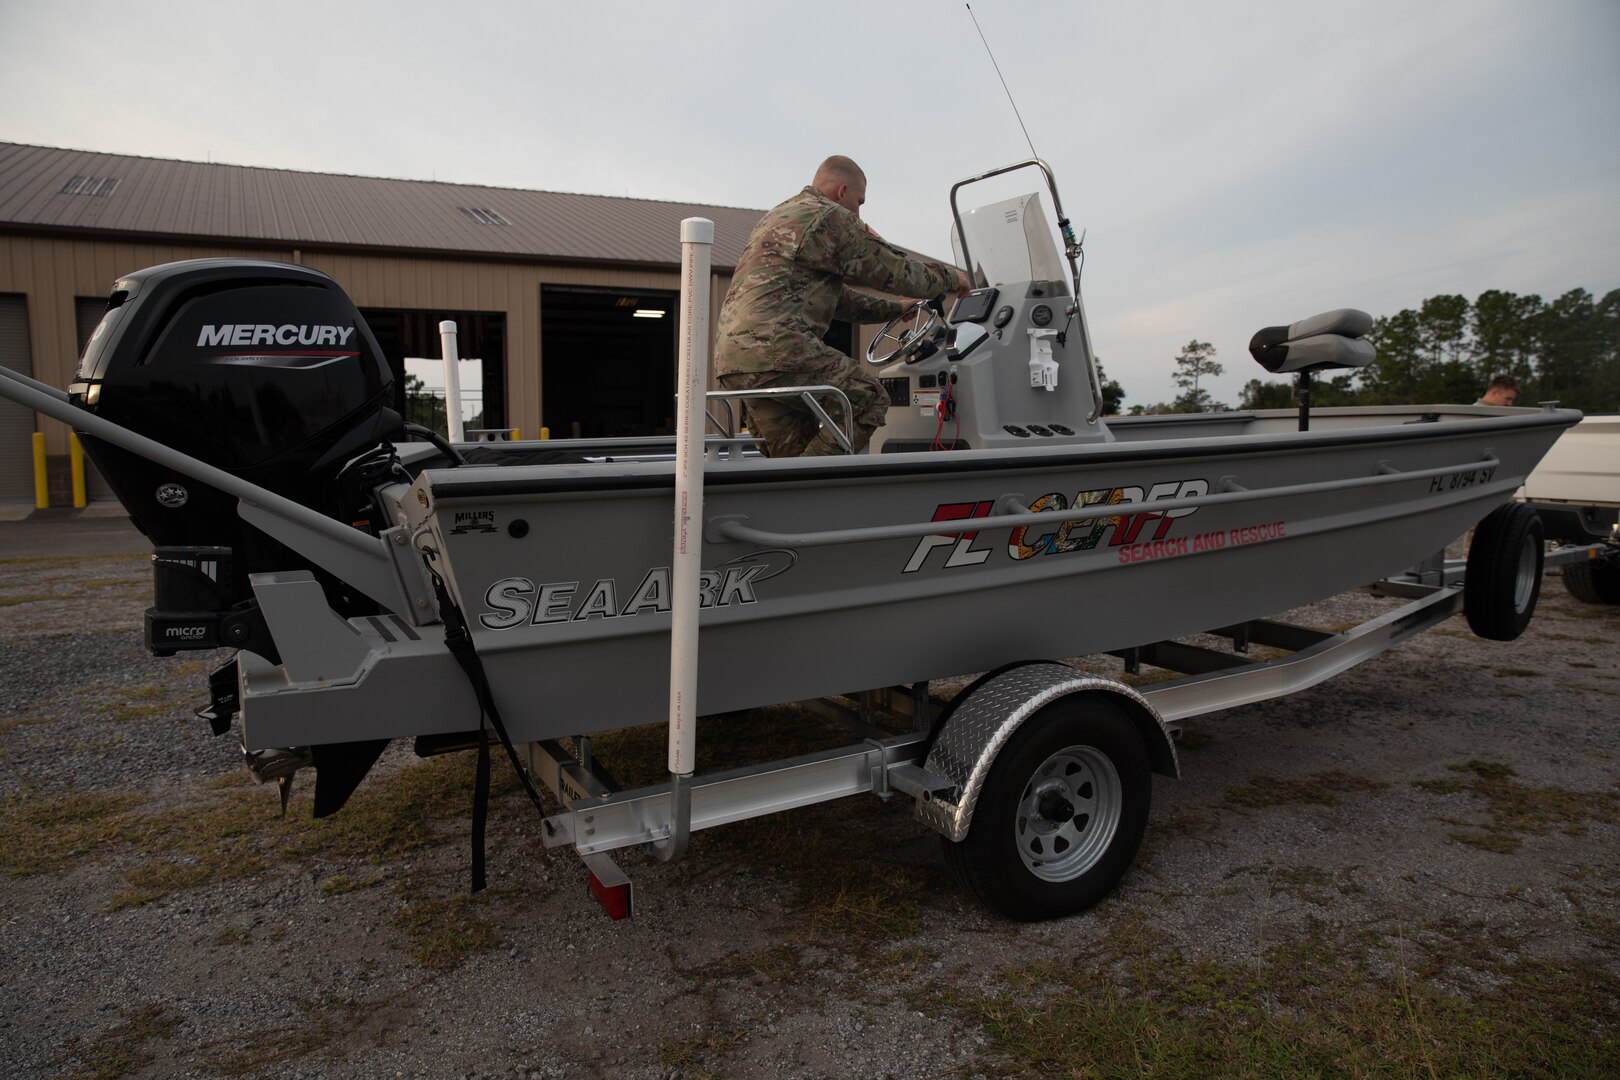 Florida National Guard Army Pfc. Kenneth Bonn, a combat engineer with the 753rd Engineering Brigade, inspects a search and rescue vessel during Hurricane Ian state activation, Camp Blanding Joint Training Center, Fla., Sept. 27, 2022. Bonn is part of the Florida National Guard's Chemical, Biological, Radiological/Nuclear, and Explosive (CBRNE) - Enhanced Response Force Package (FL-CERFP).